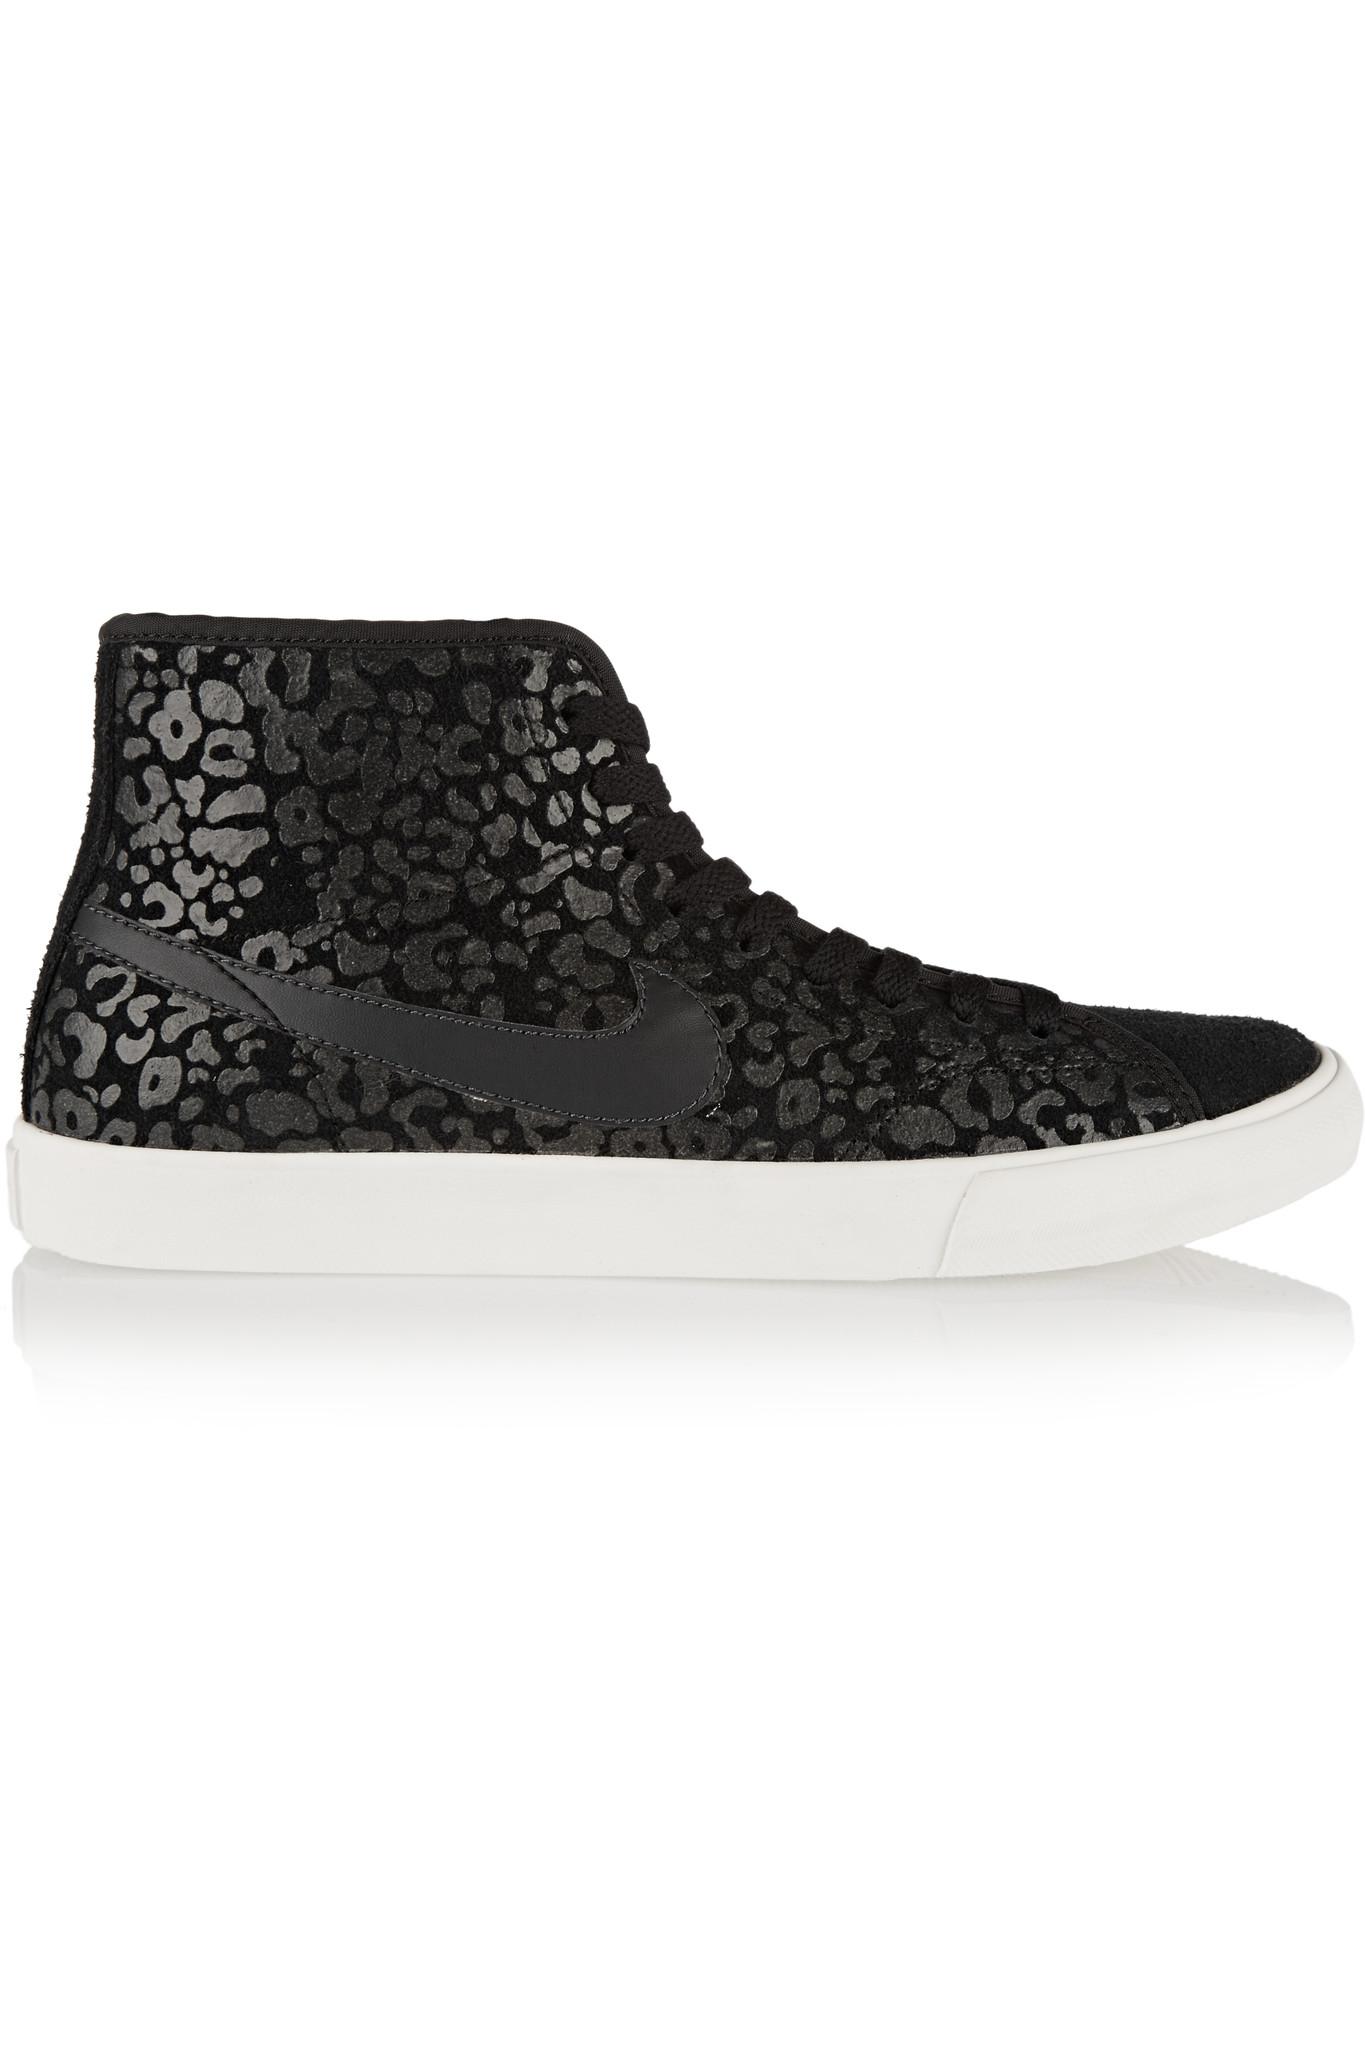 Nike Primo Court Leopard-print Suede High-top Sneakers in Black | Lyst